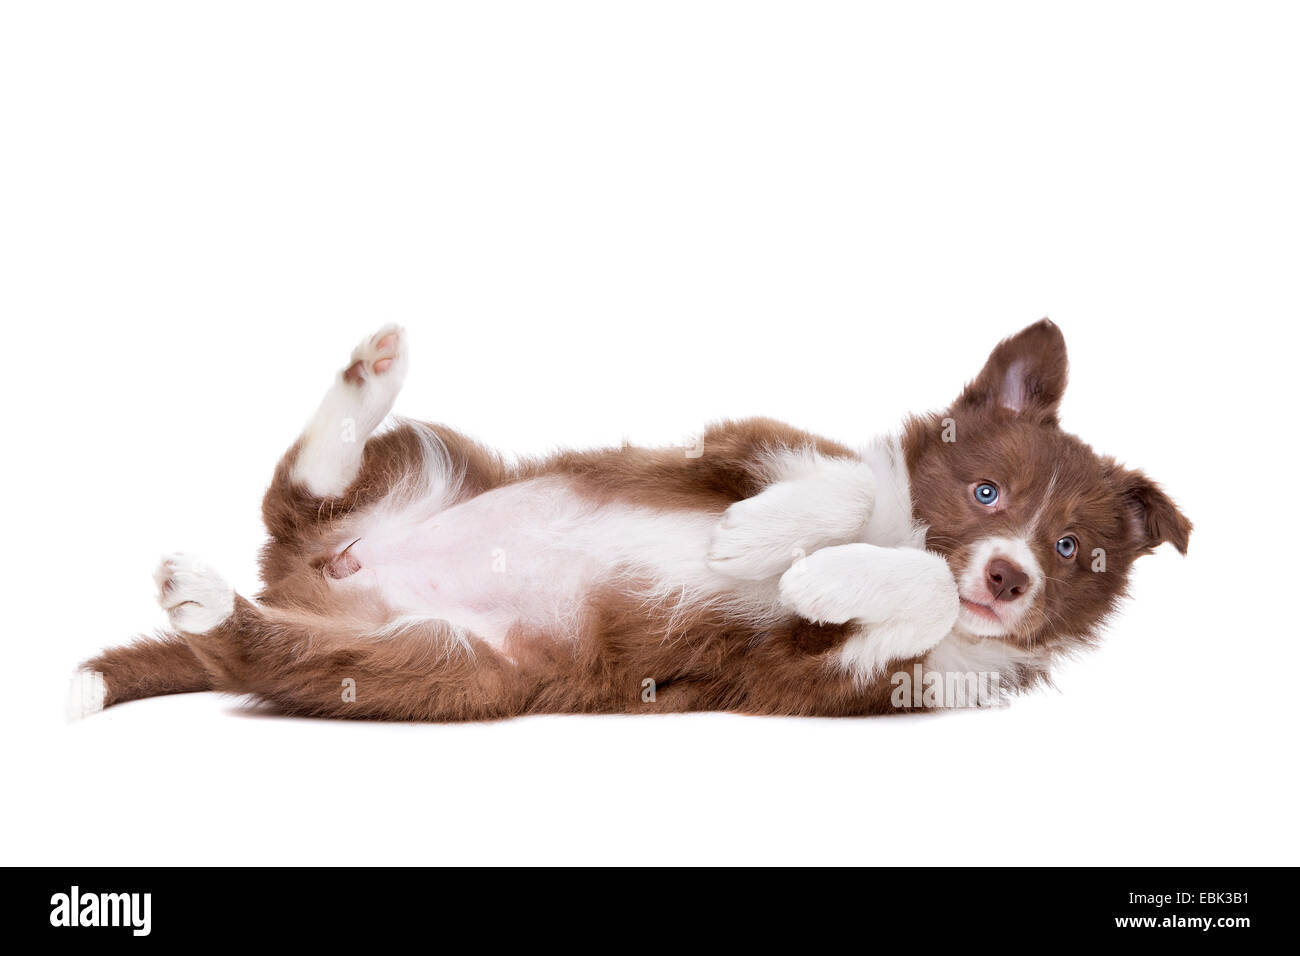 Border Collie puppy dog playing silly in front of a white background Stock Photo